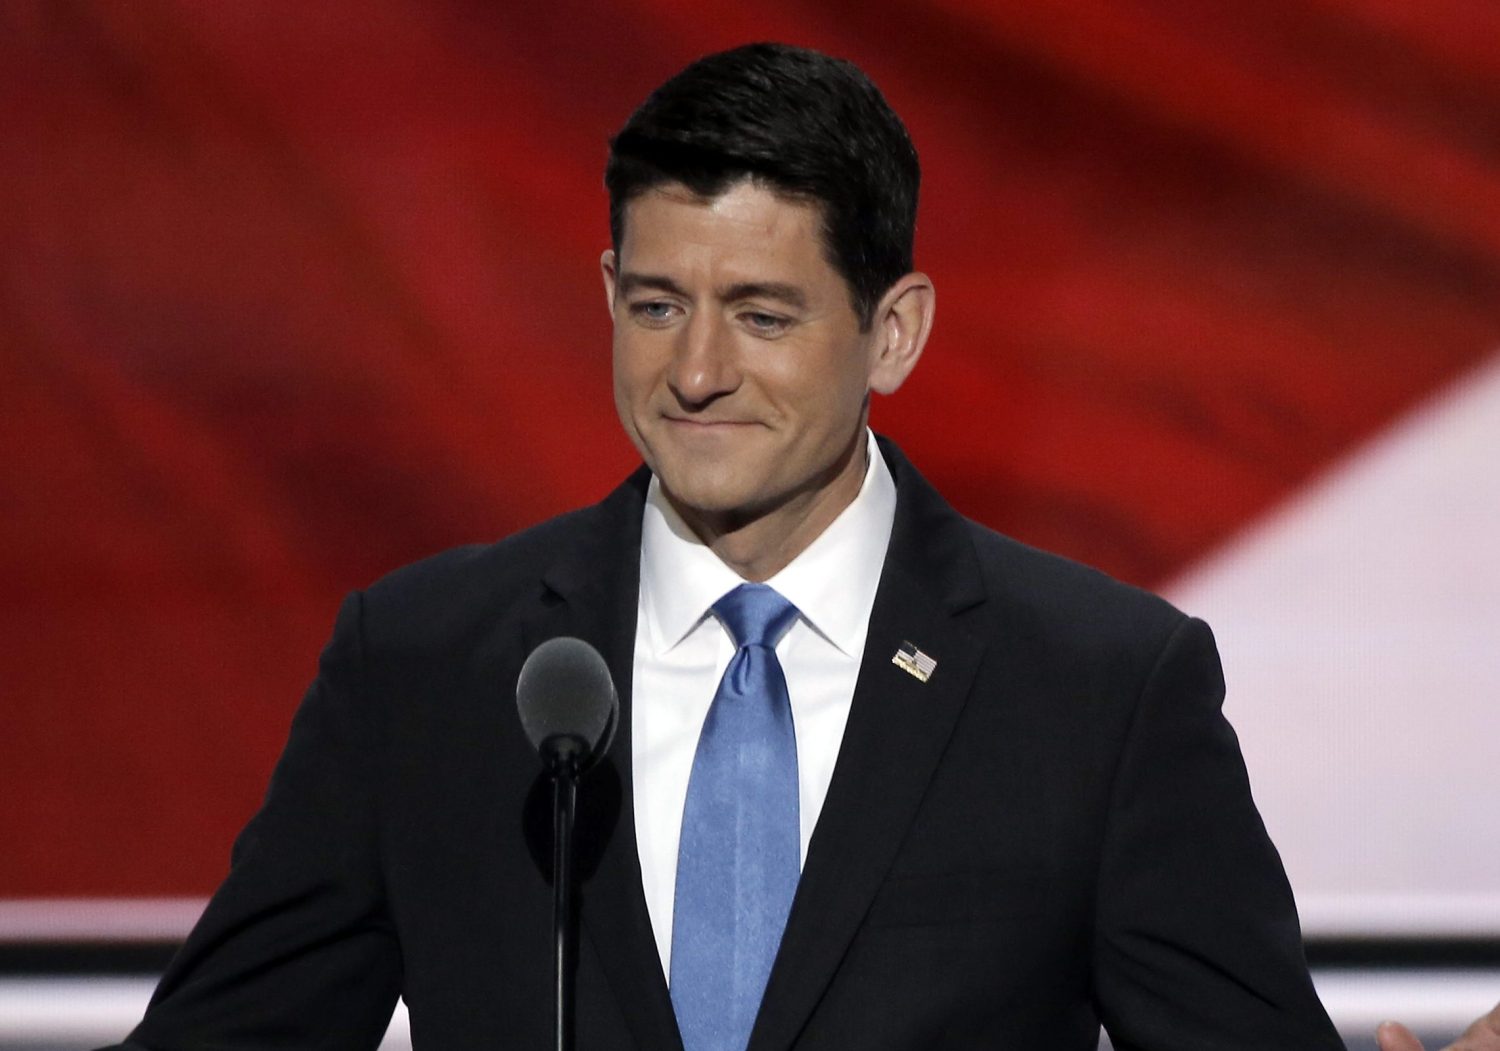 U.S. Speaker of the House and Republican National Convention Chairman Paul Ryan